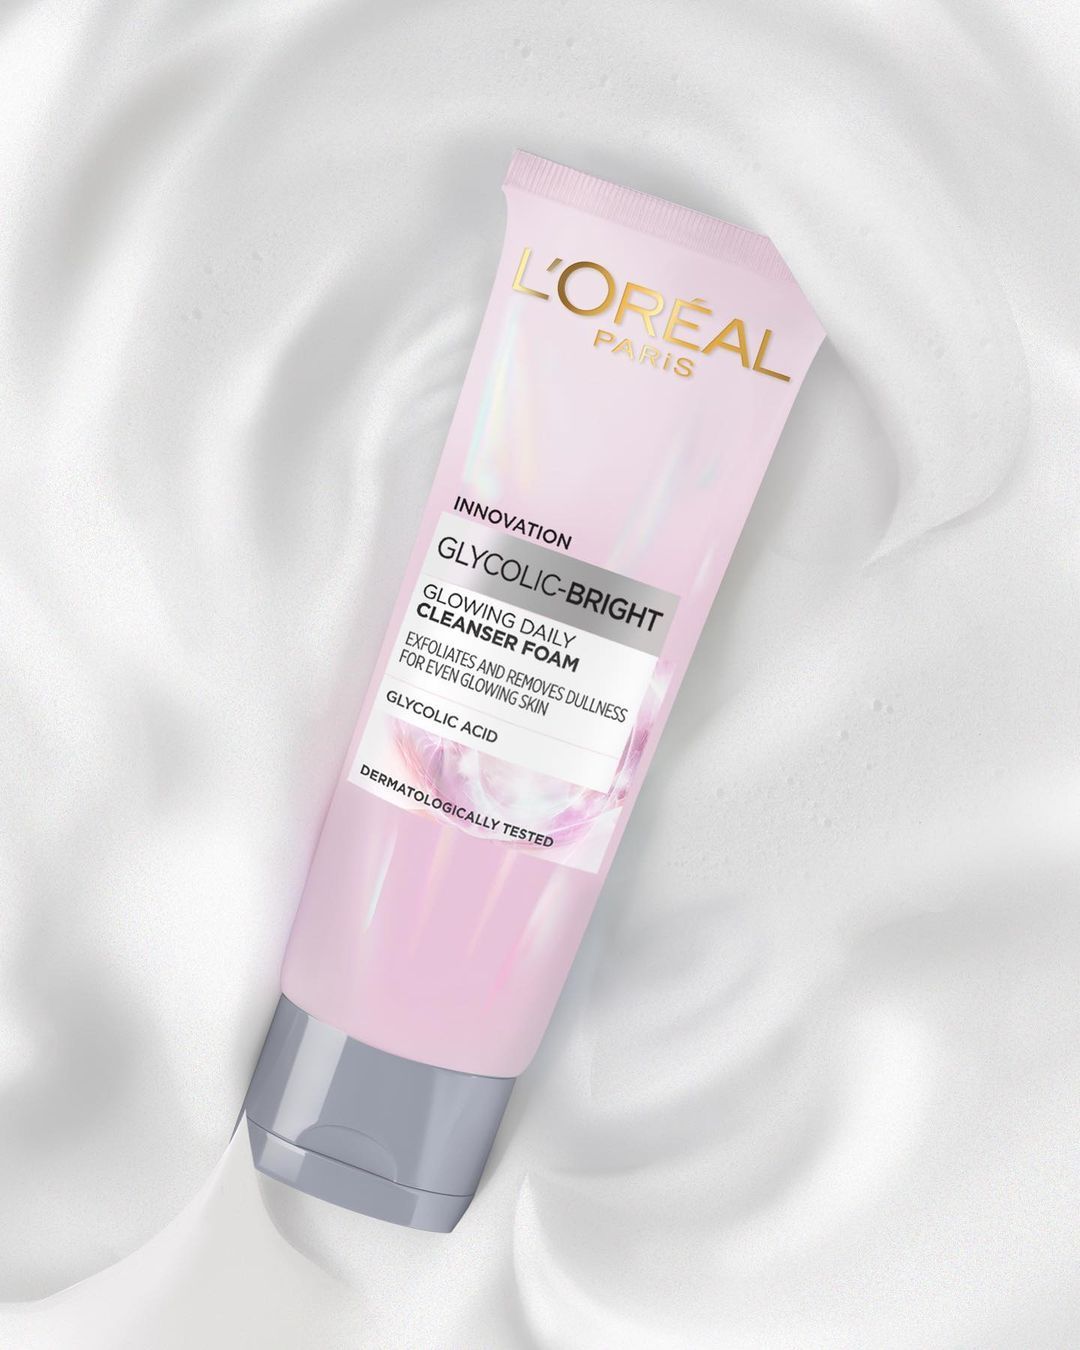 L'Oreal Paris Glycolic Bright Glowing Daily Cleanser Foam